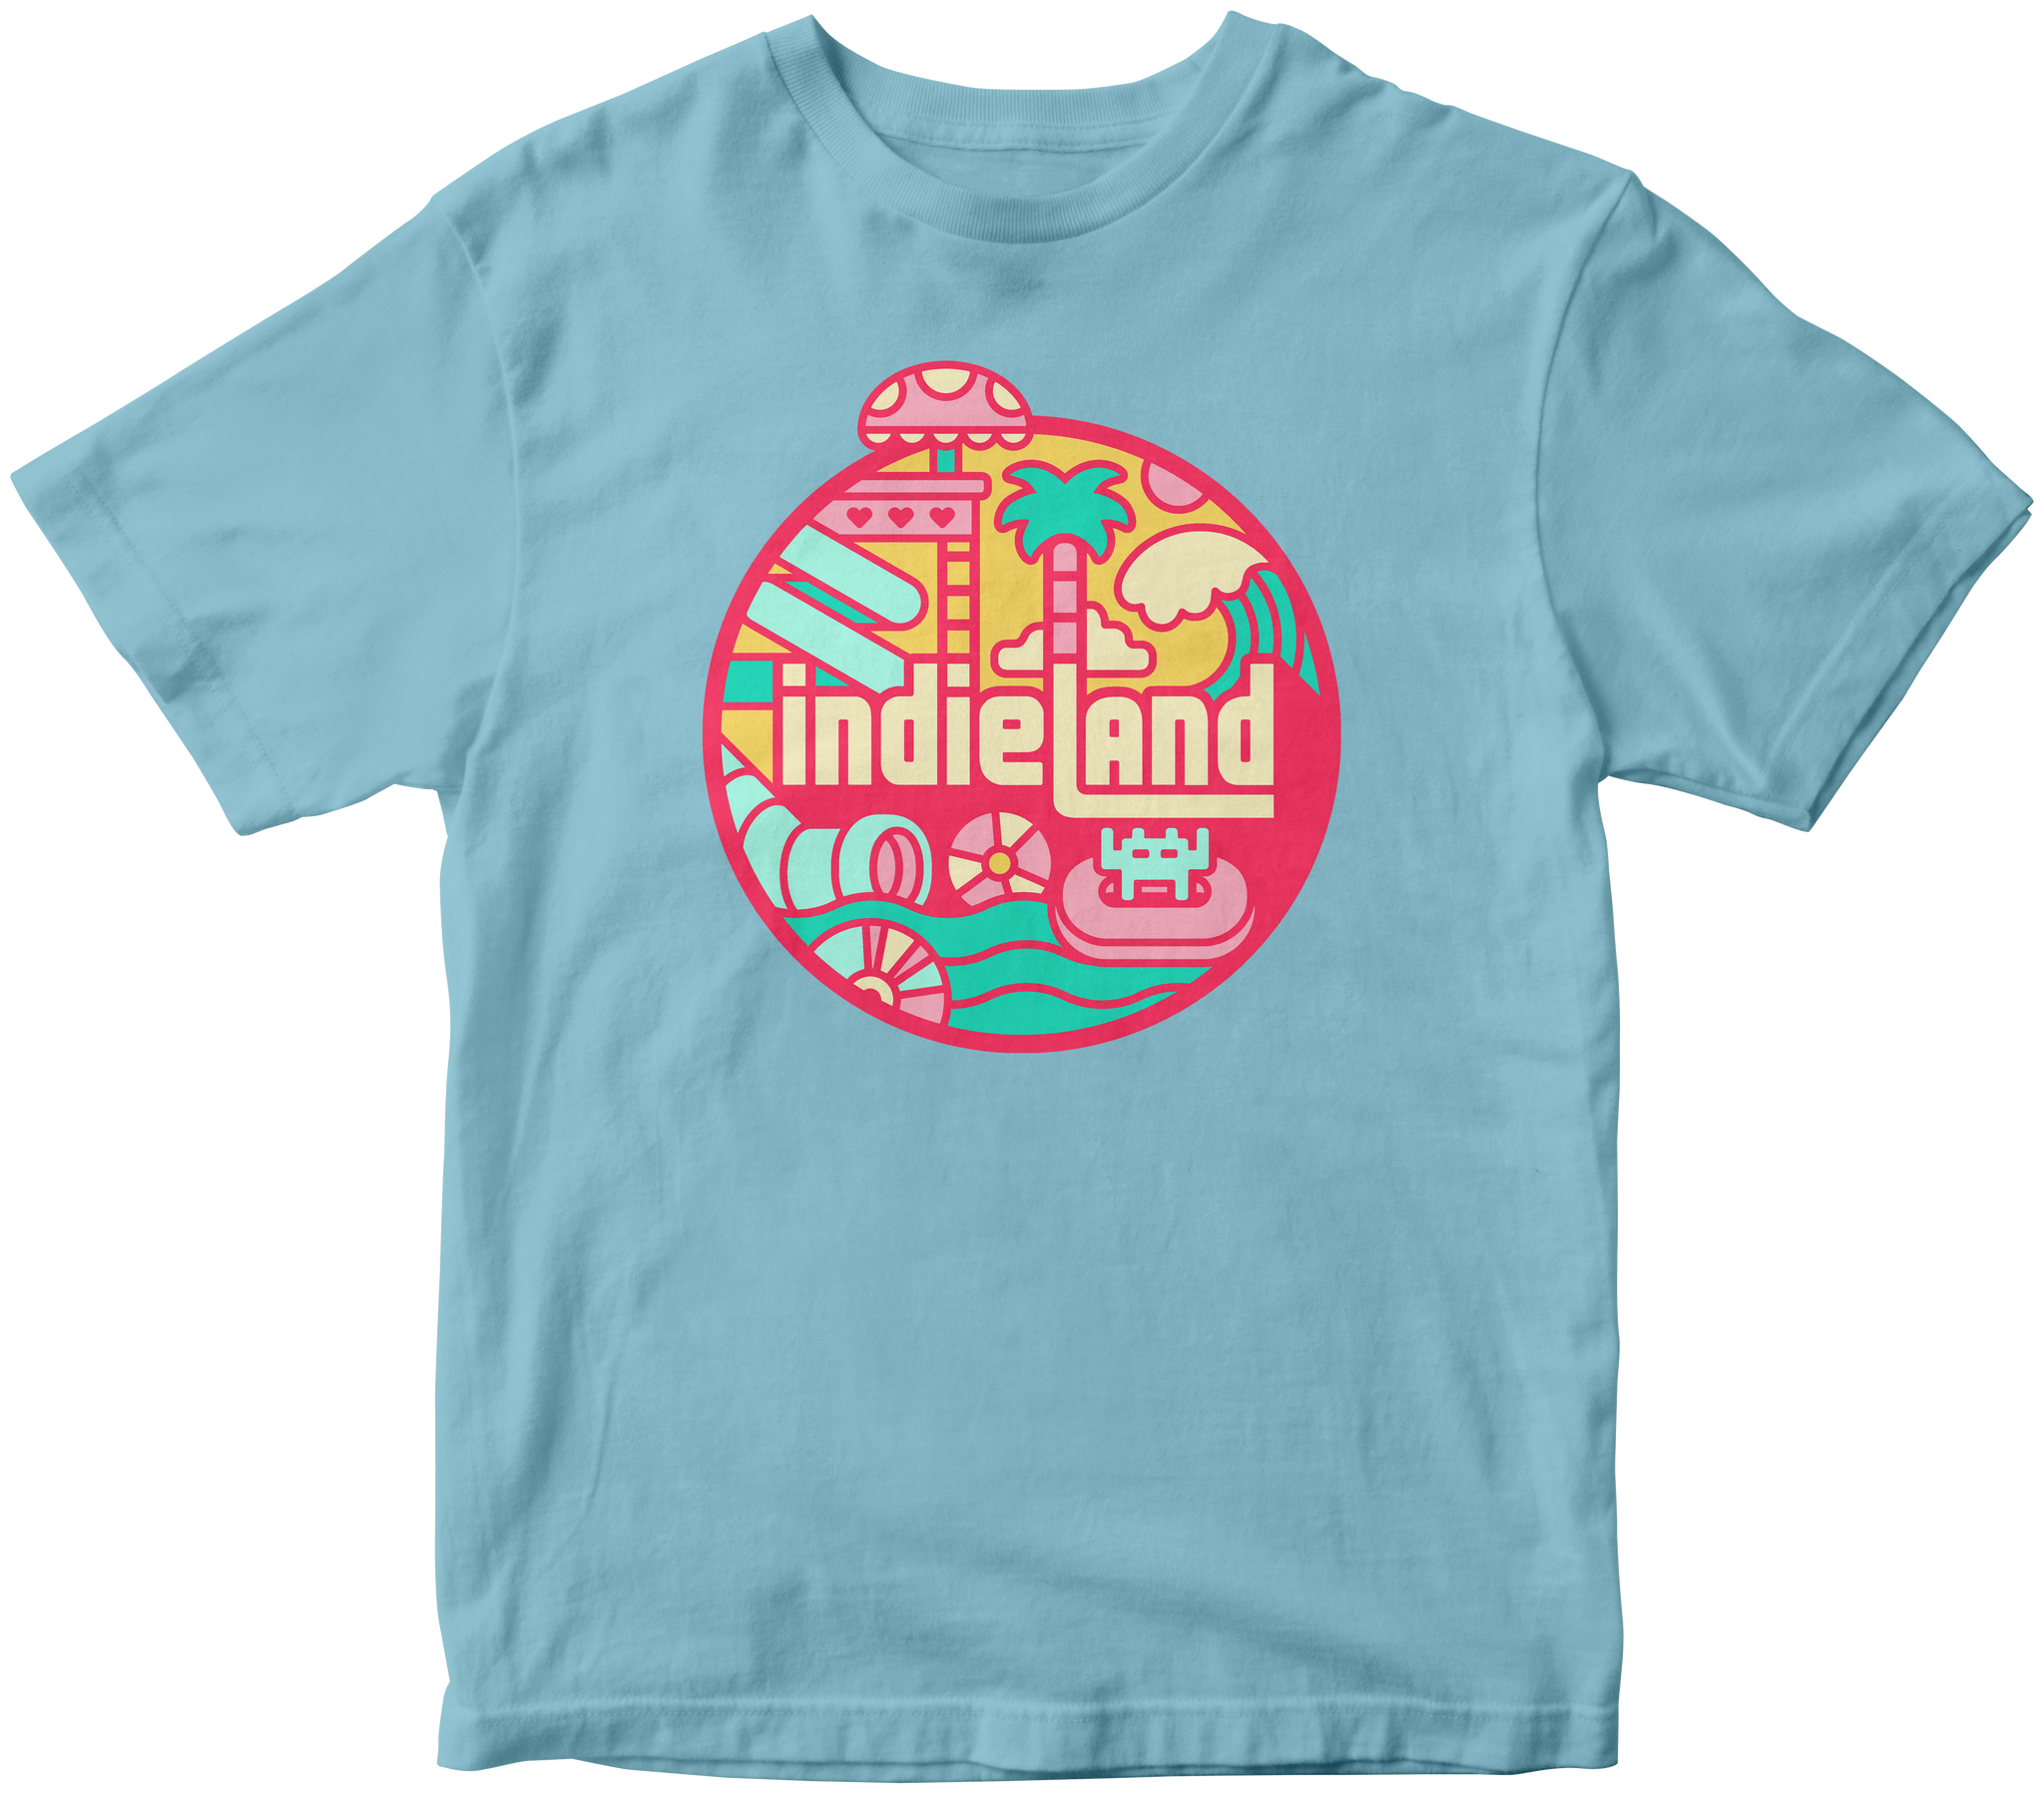 IndieLand Official 2021 Tee